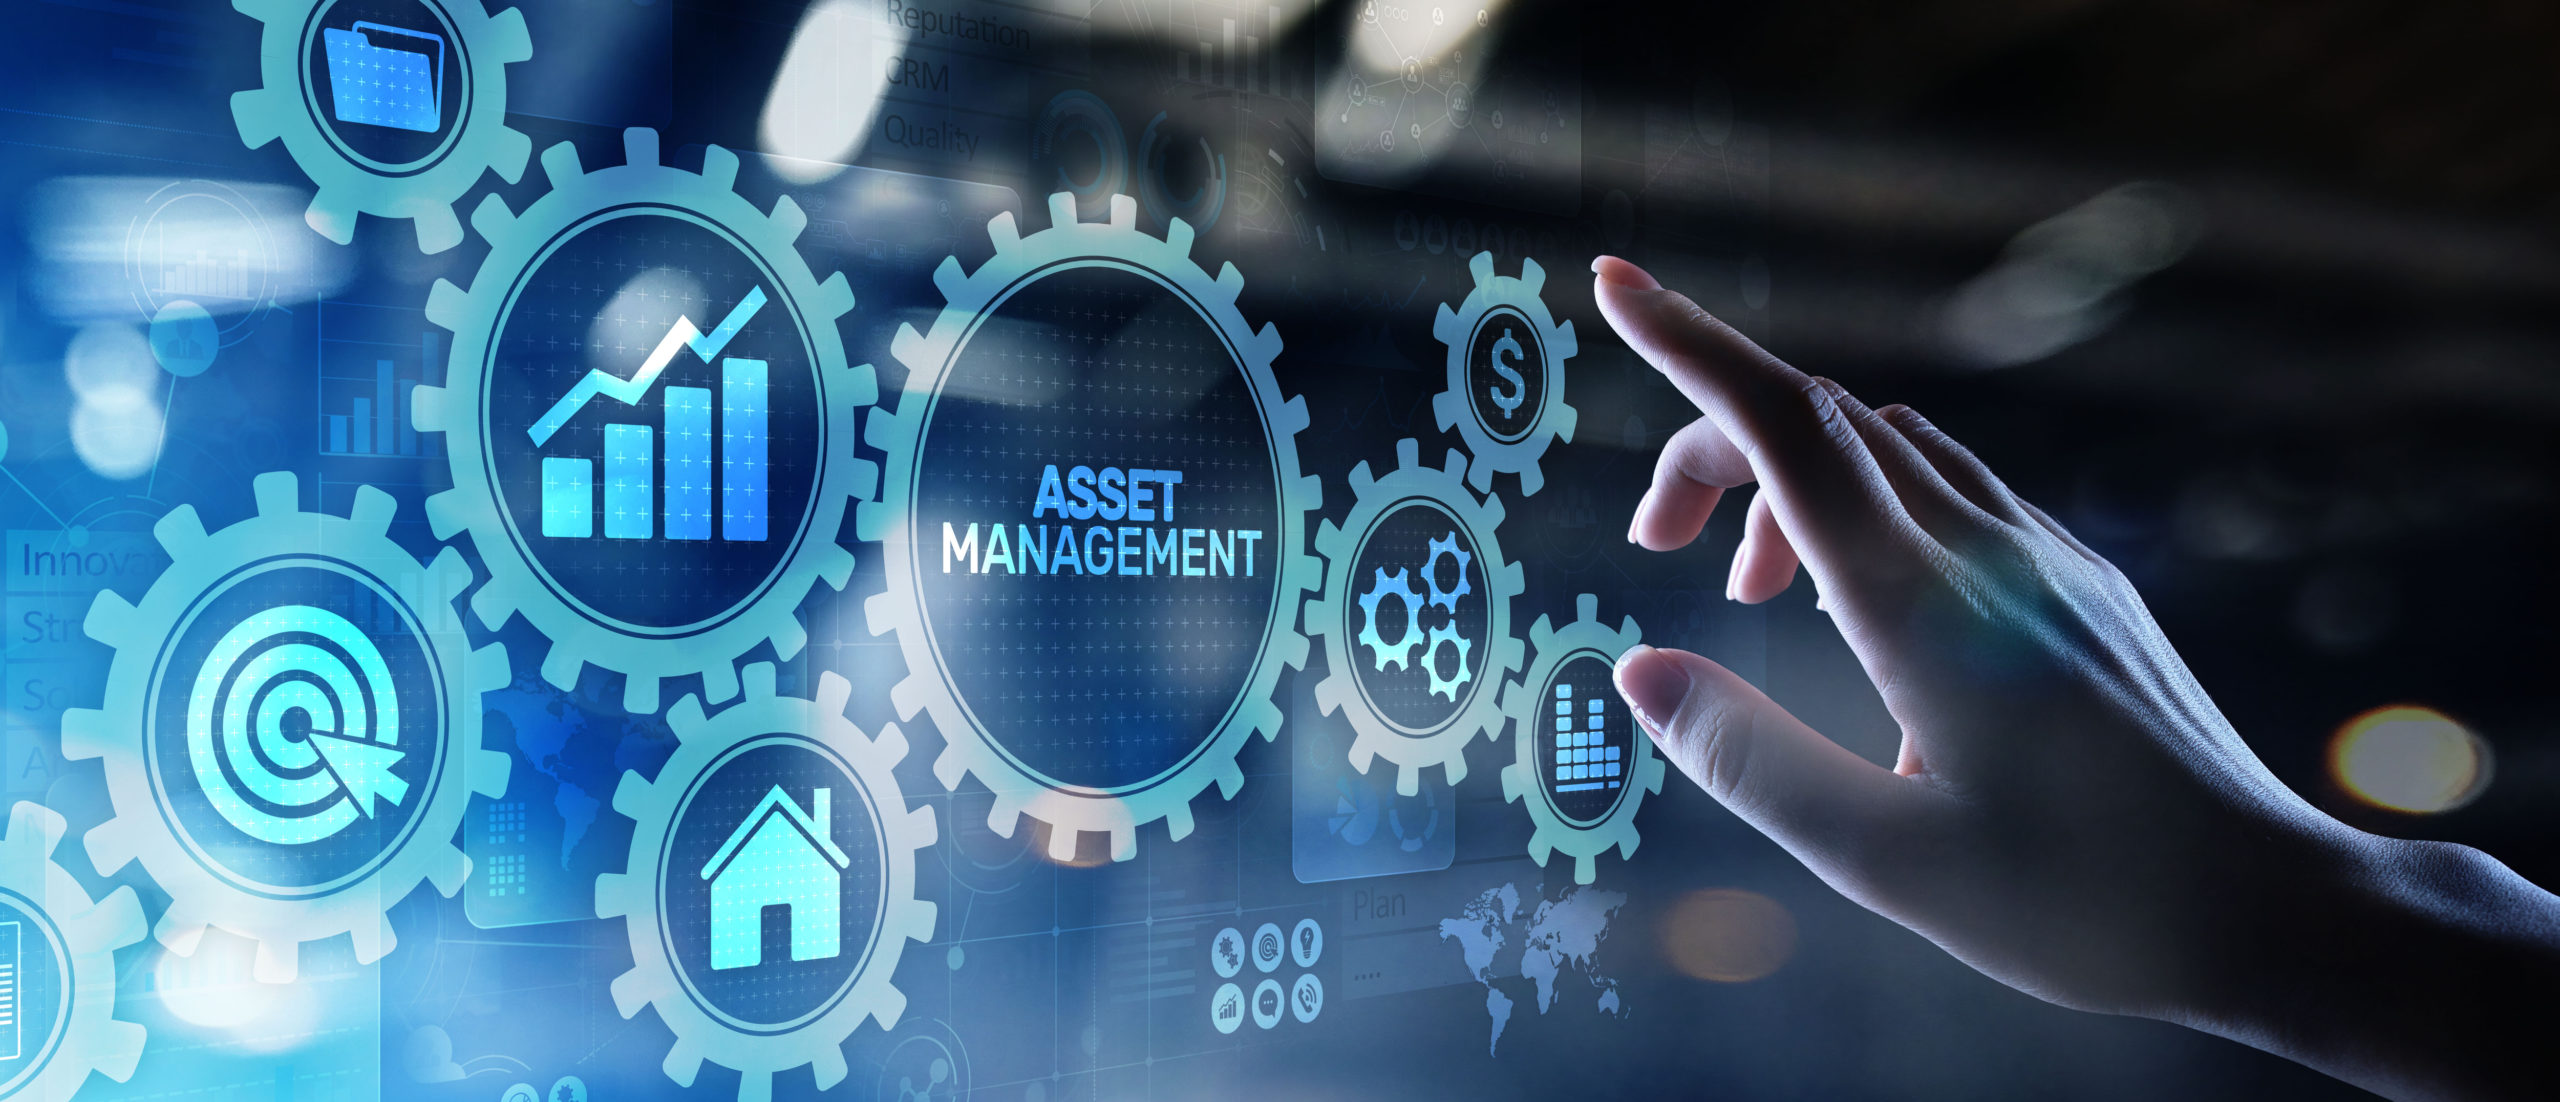 Asset Management Glendale, MO | Financial Planners | Investment Advisors | Wealth Management